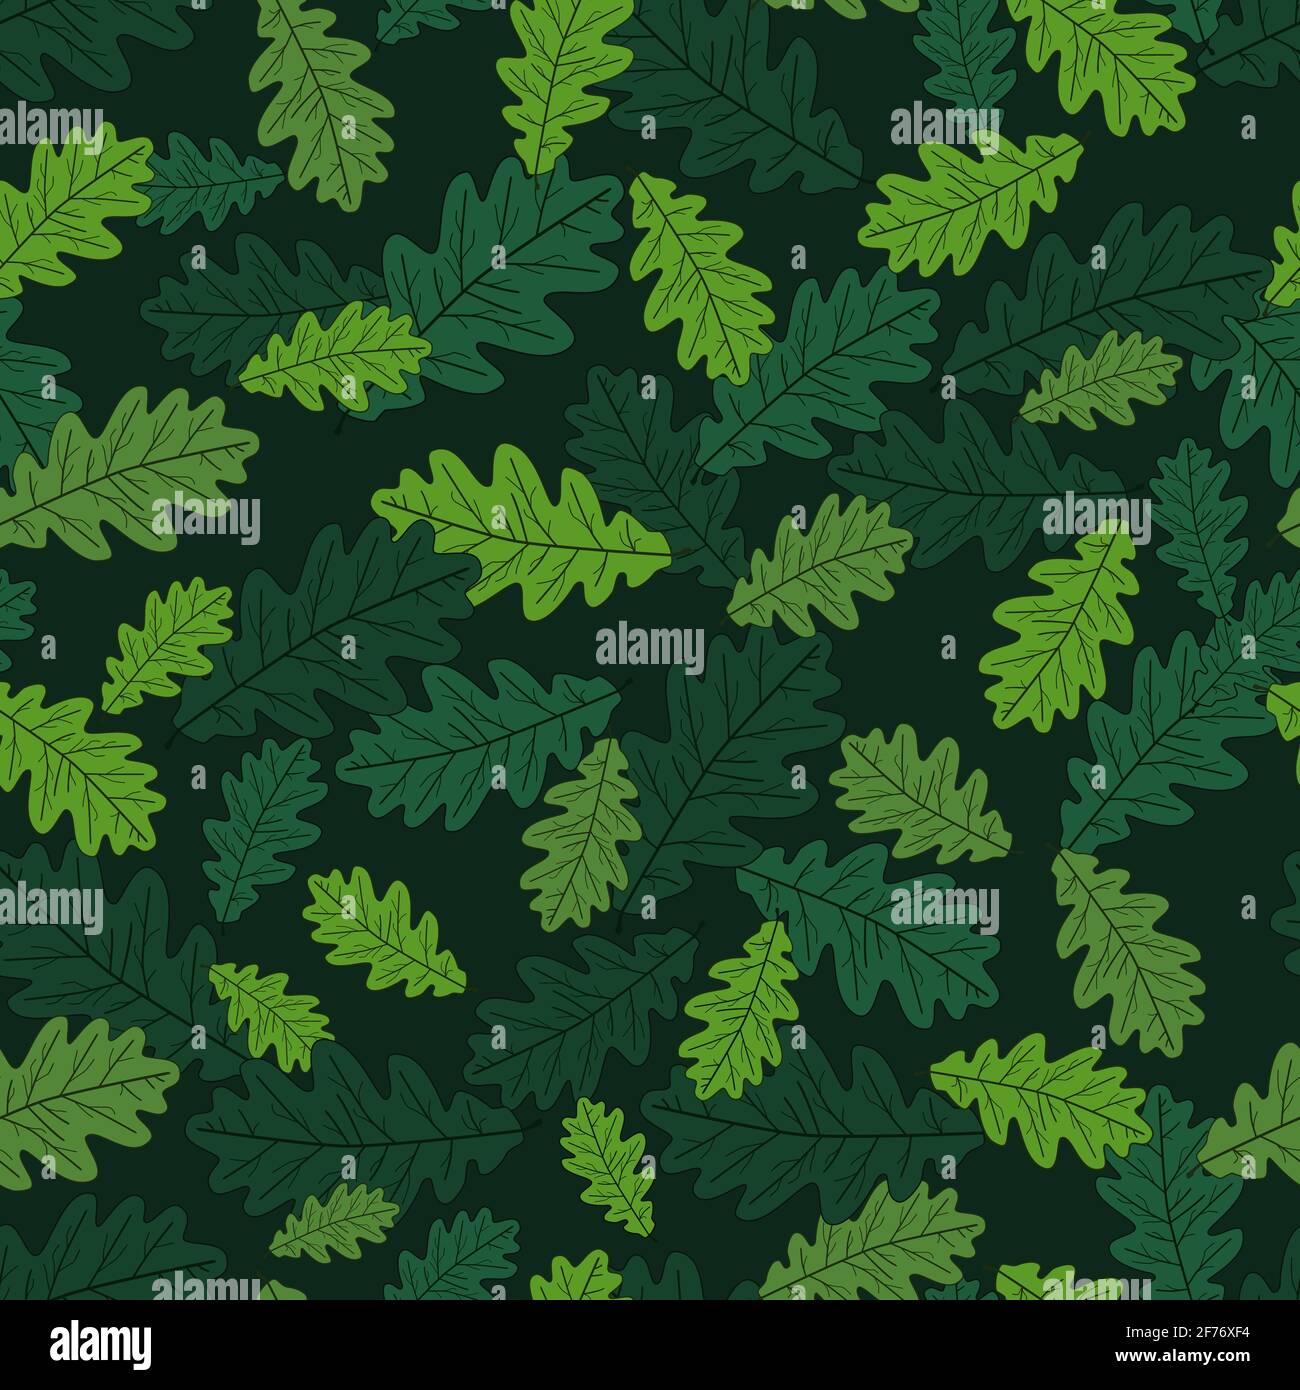 Oak Leafs Texture, Seamless Pattern. Vector Seamless Background  for Wallpapers, Wrapping Papers, Textile, Greeting Cards Stock Vector